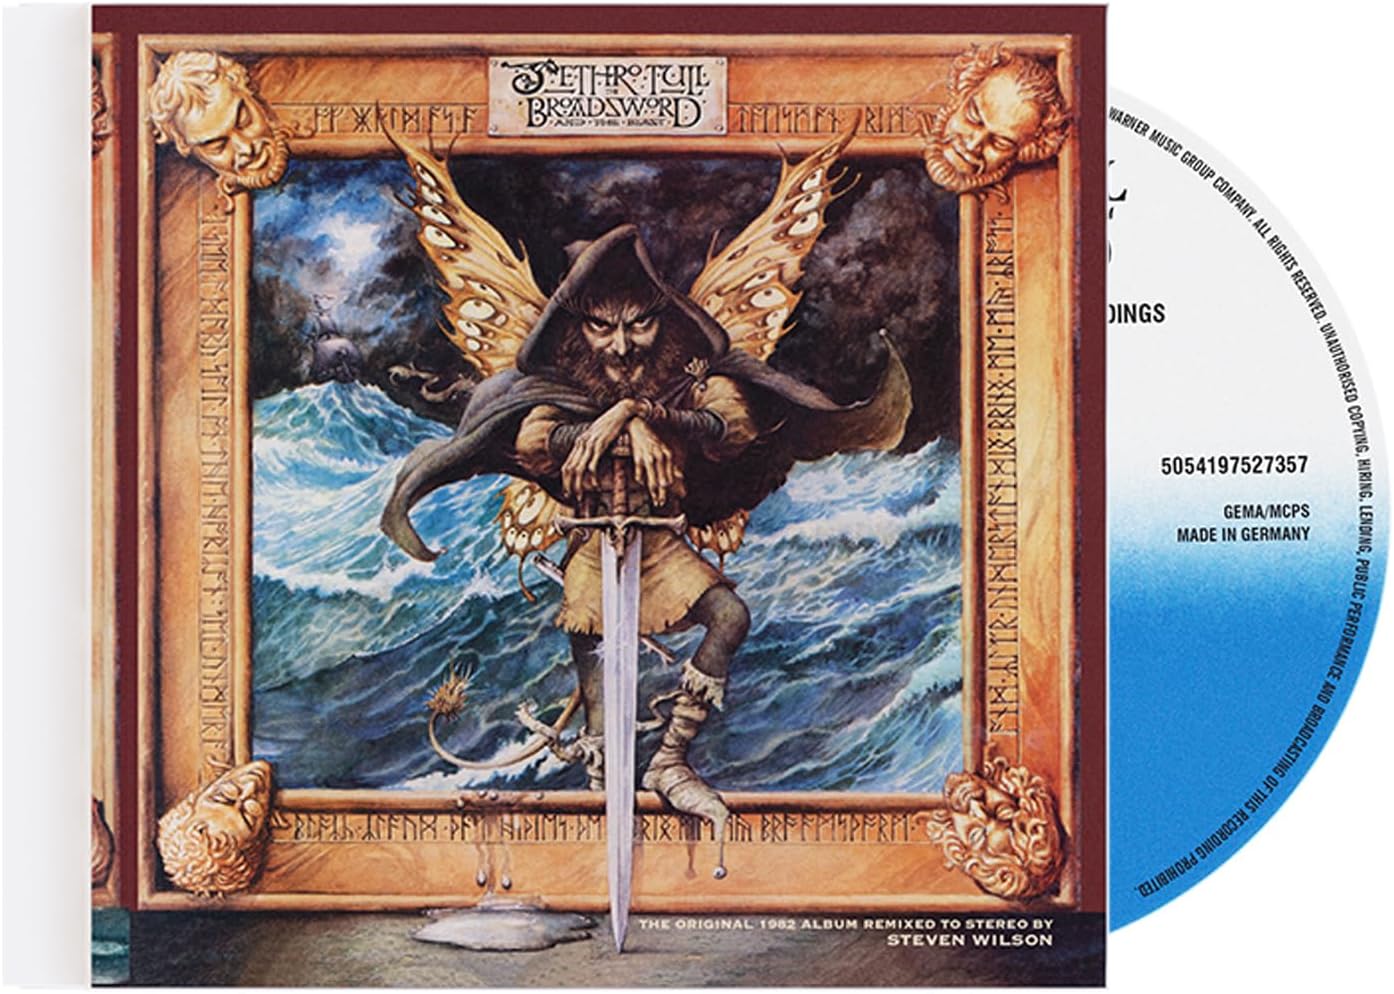 JETHRO TULL - The broadsword and the beast (remixes S. Wilson + associated recordings)